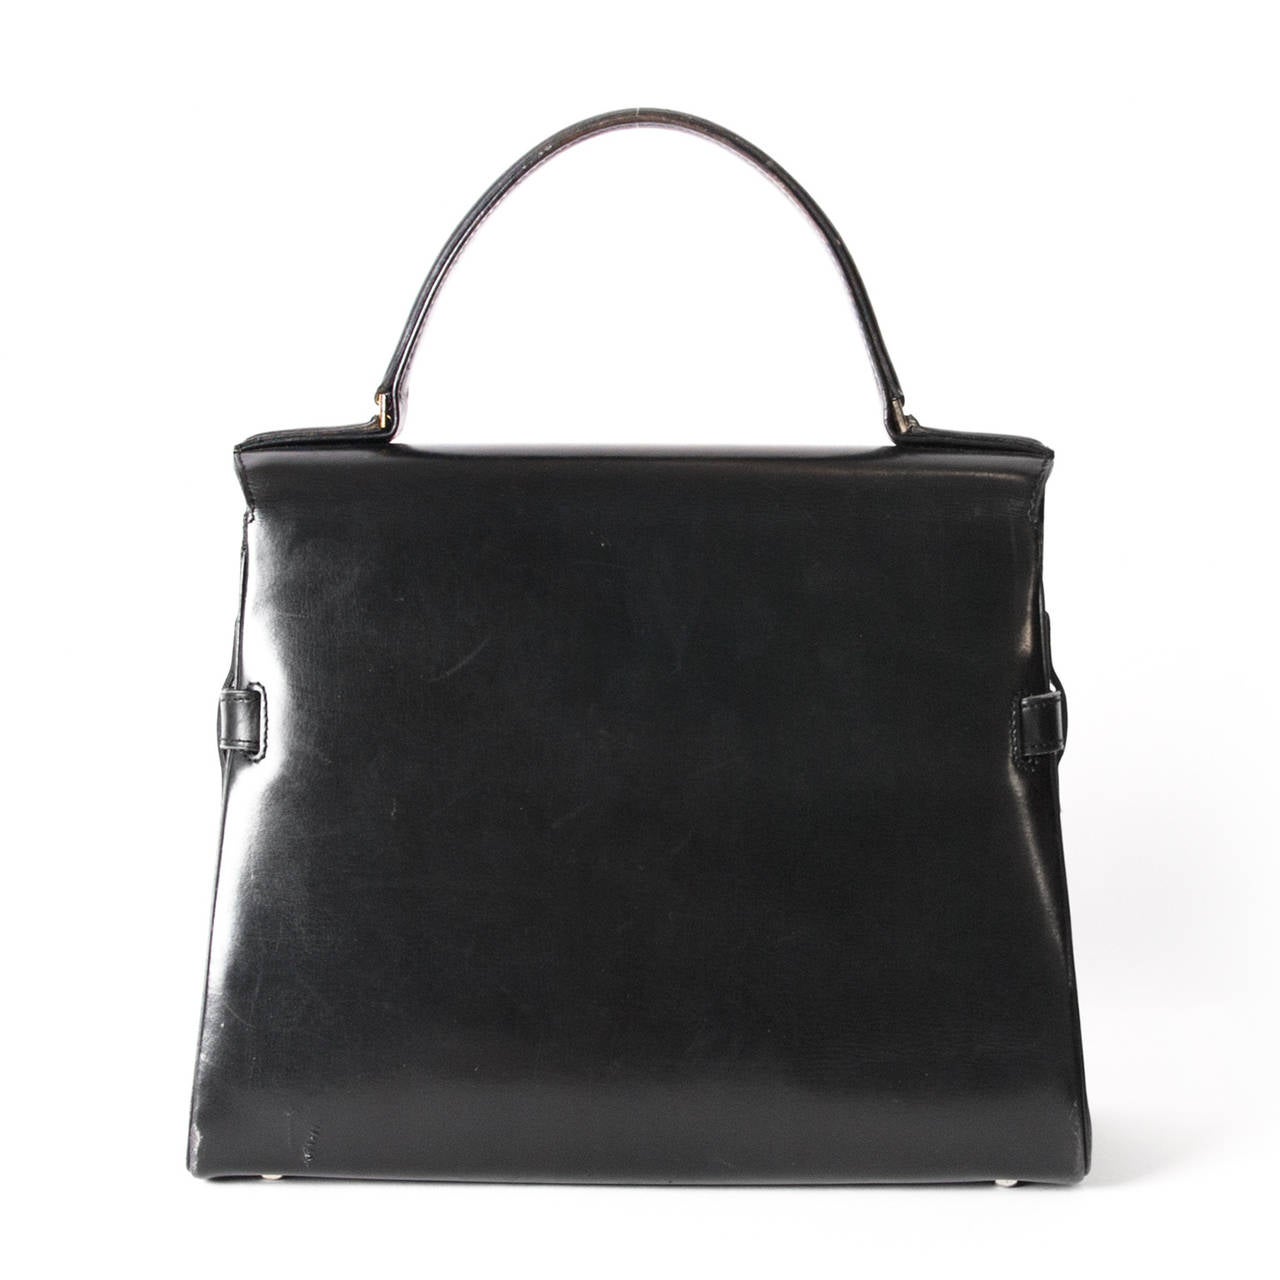 Delvaux Tempete Black

Le Delvaux Tempete is a well-known design.

The bag will add some class to your outfit from the moment you're wearing it.

It features goldtoned hardware and four studs on the bottom for better protection.

Inside